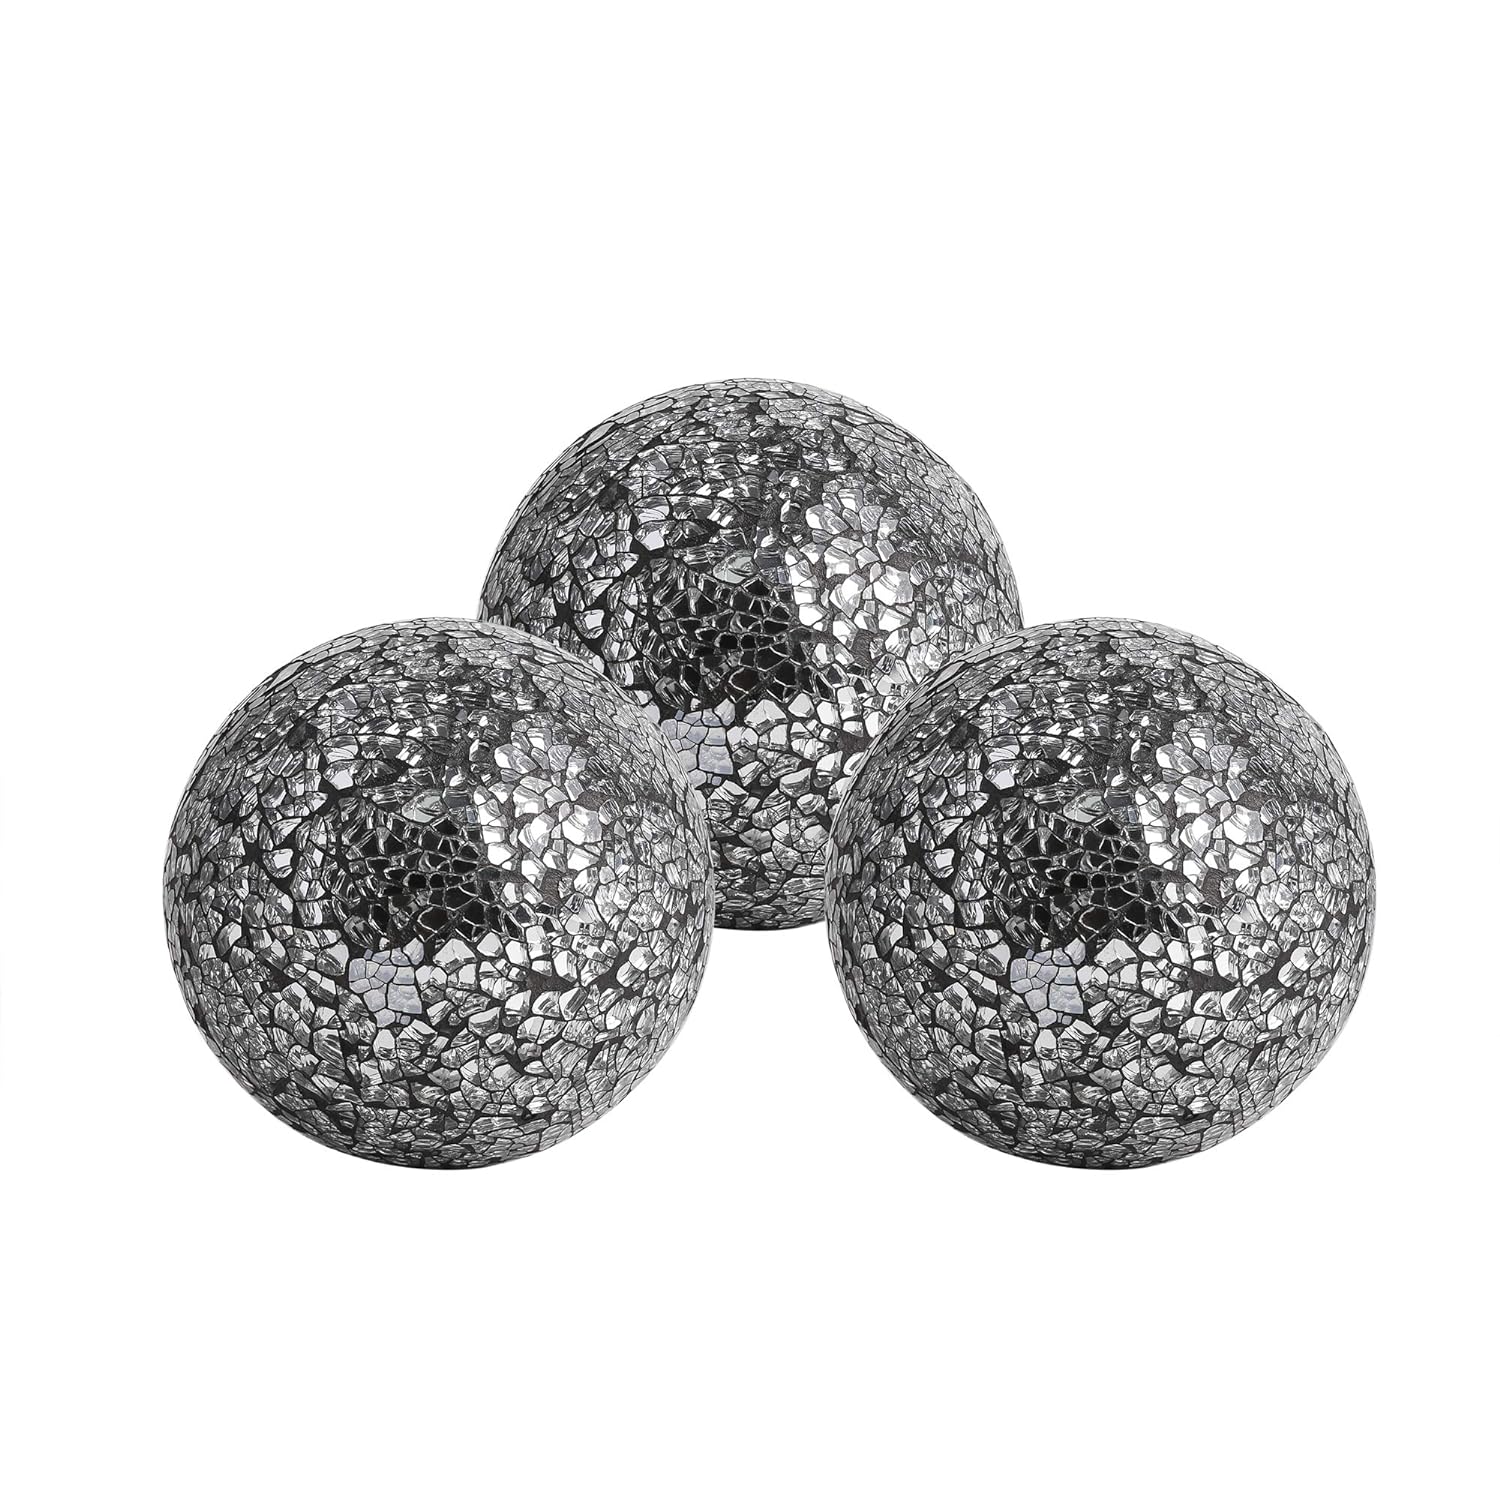 WHOLE HOUSEWARES | Decorative Balls | Set of 3 Glass Mosaic Orbs for Bowls | 4 Diameter | Table Centerpiece | Coffee Table and House Decor (Black Silver)